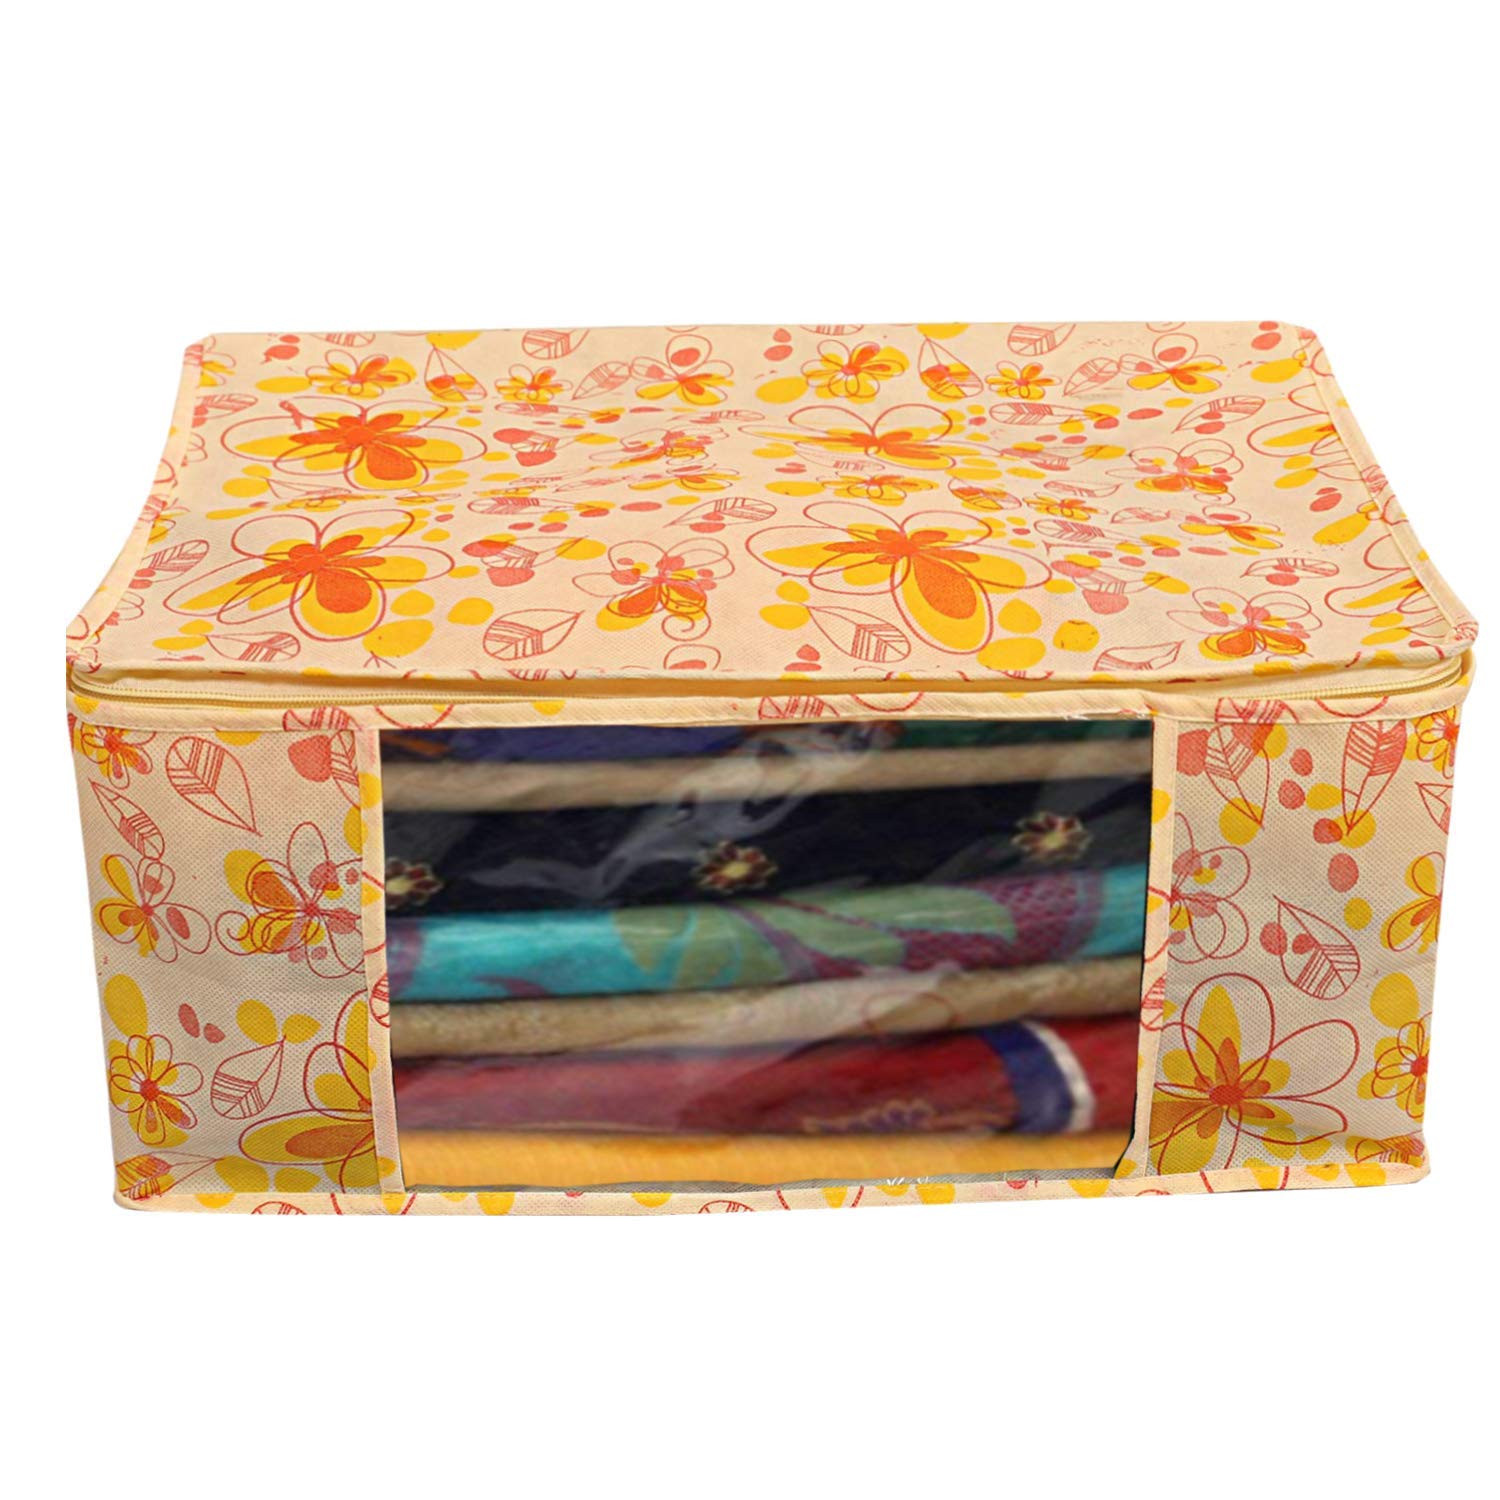 Kuber Industries Flower Printed Non Woven Saree Cover And Underbed Storage Bag, Cloth Organizer For Storage, Blanket Cover Combo Set (Ivory & Red) -CTKTC38631